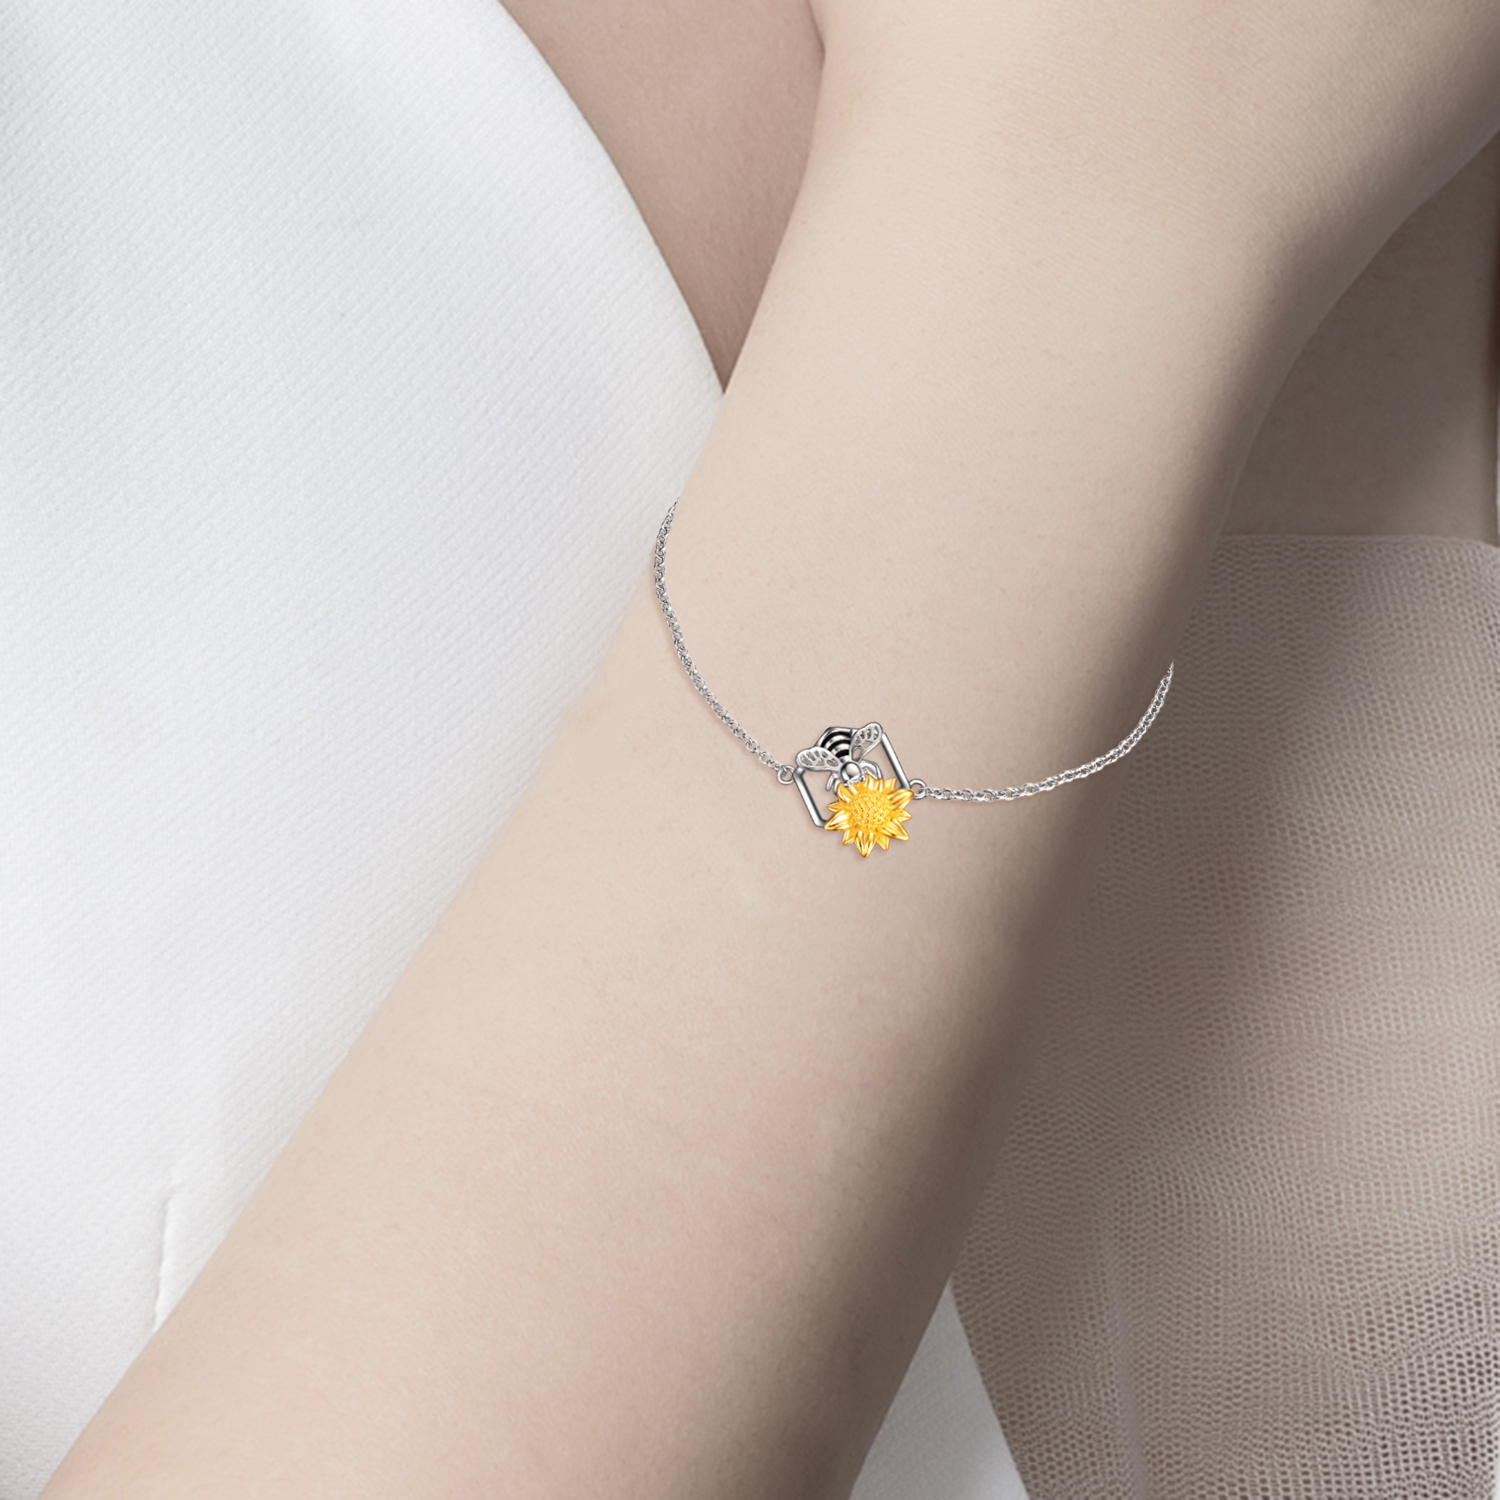 Sunflower Bee Bracelet Sterling Silver Honey Bumble Bee Flower Jewelry Gifts for Women Birthday